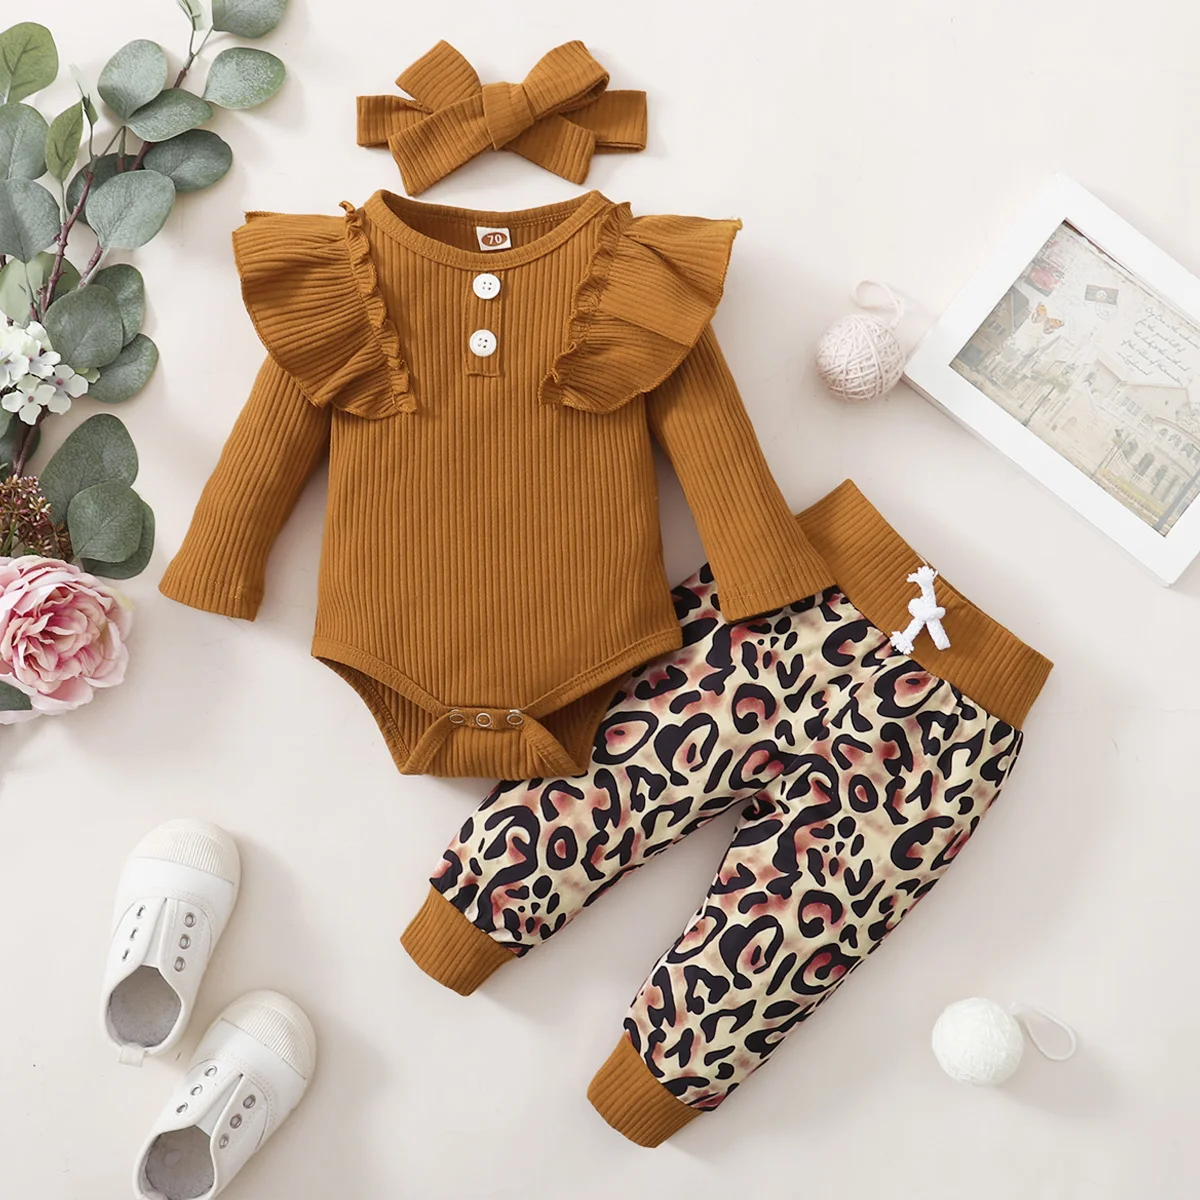 Newborn Baby Girl Clothes Set Toddler Girl Outfits Fashion Big Bow Top + Pants Whole Sale Kids Girls Clothes Outfits 3 Months Baby Clothing Set for boy Baby Clothing Set